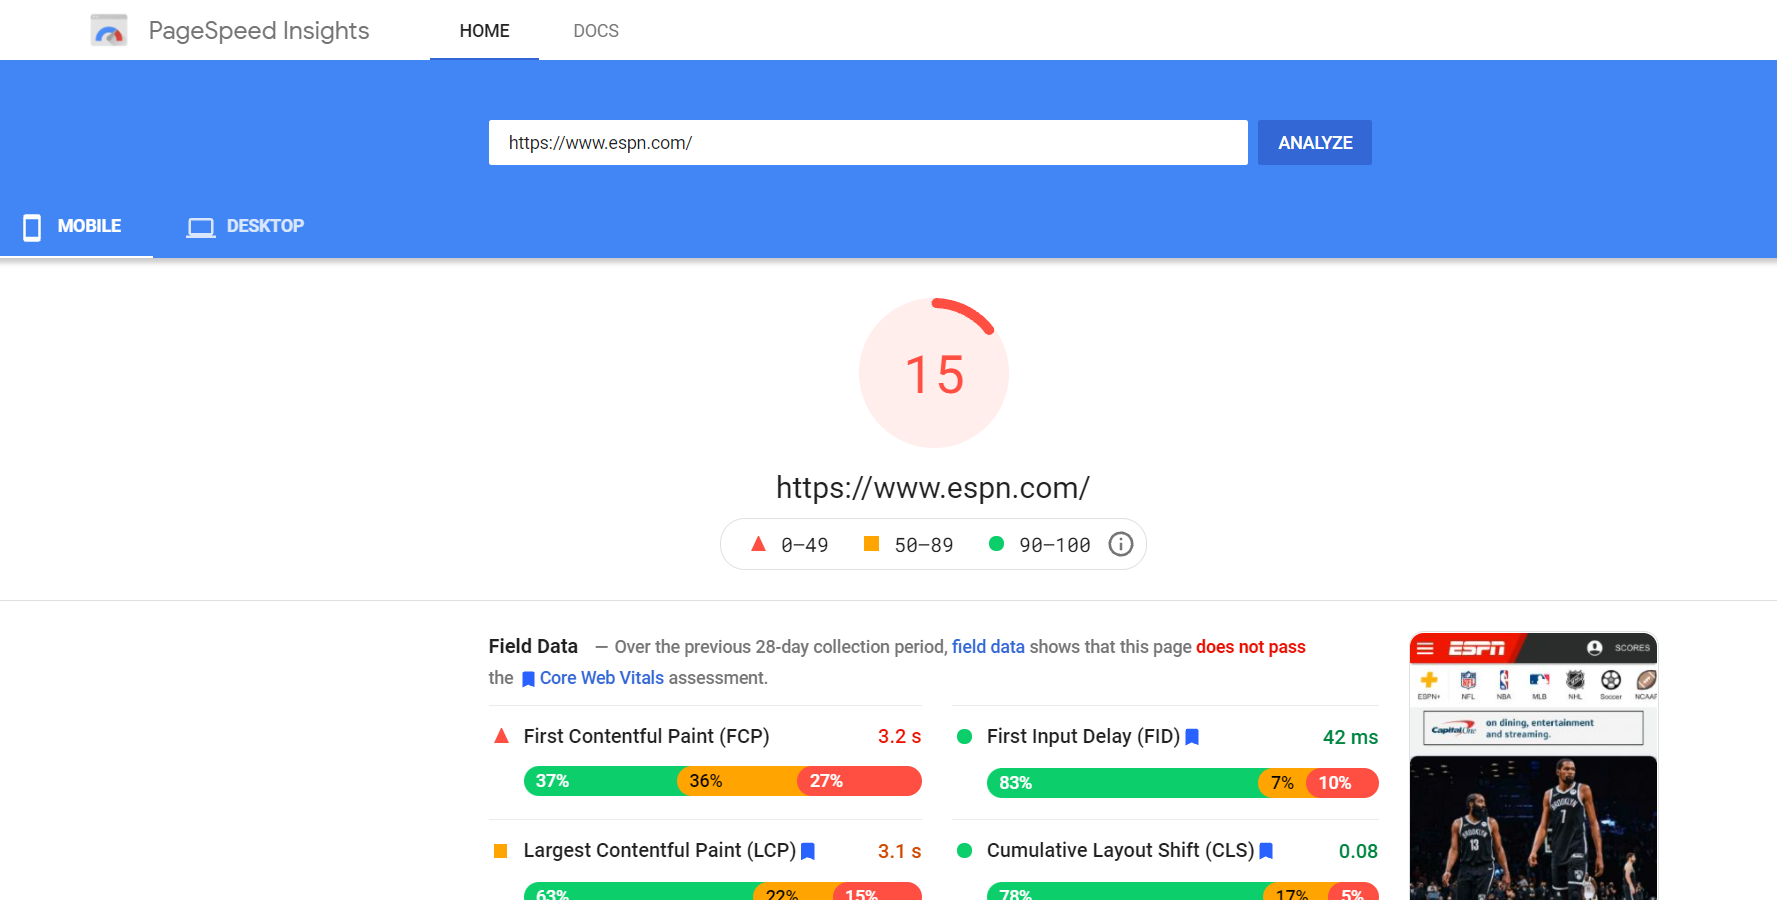 Screenshot of Page Speed Insights